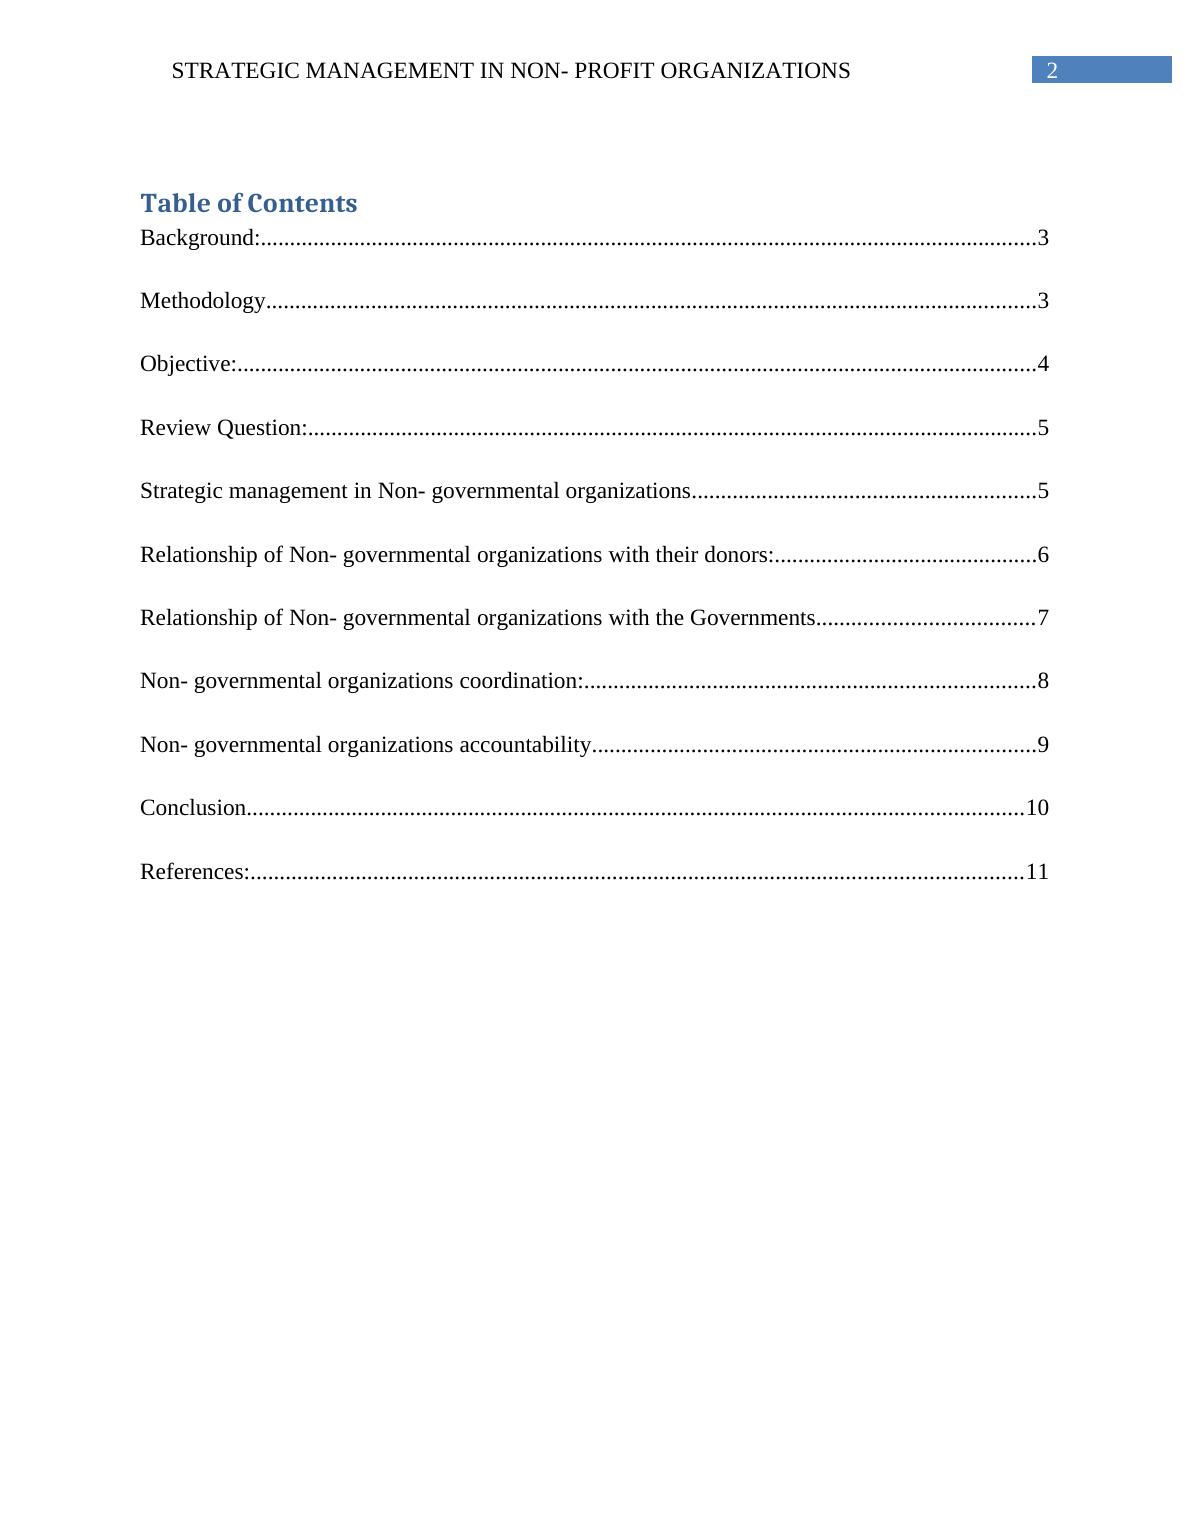 Report on Strategic Management in Non- governmental Organizations_3